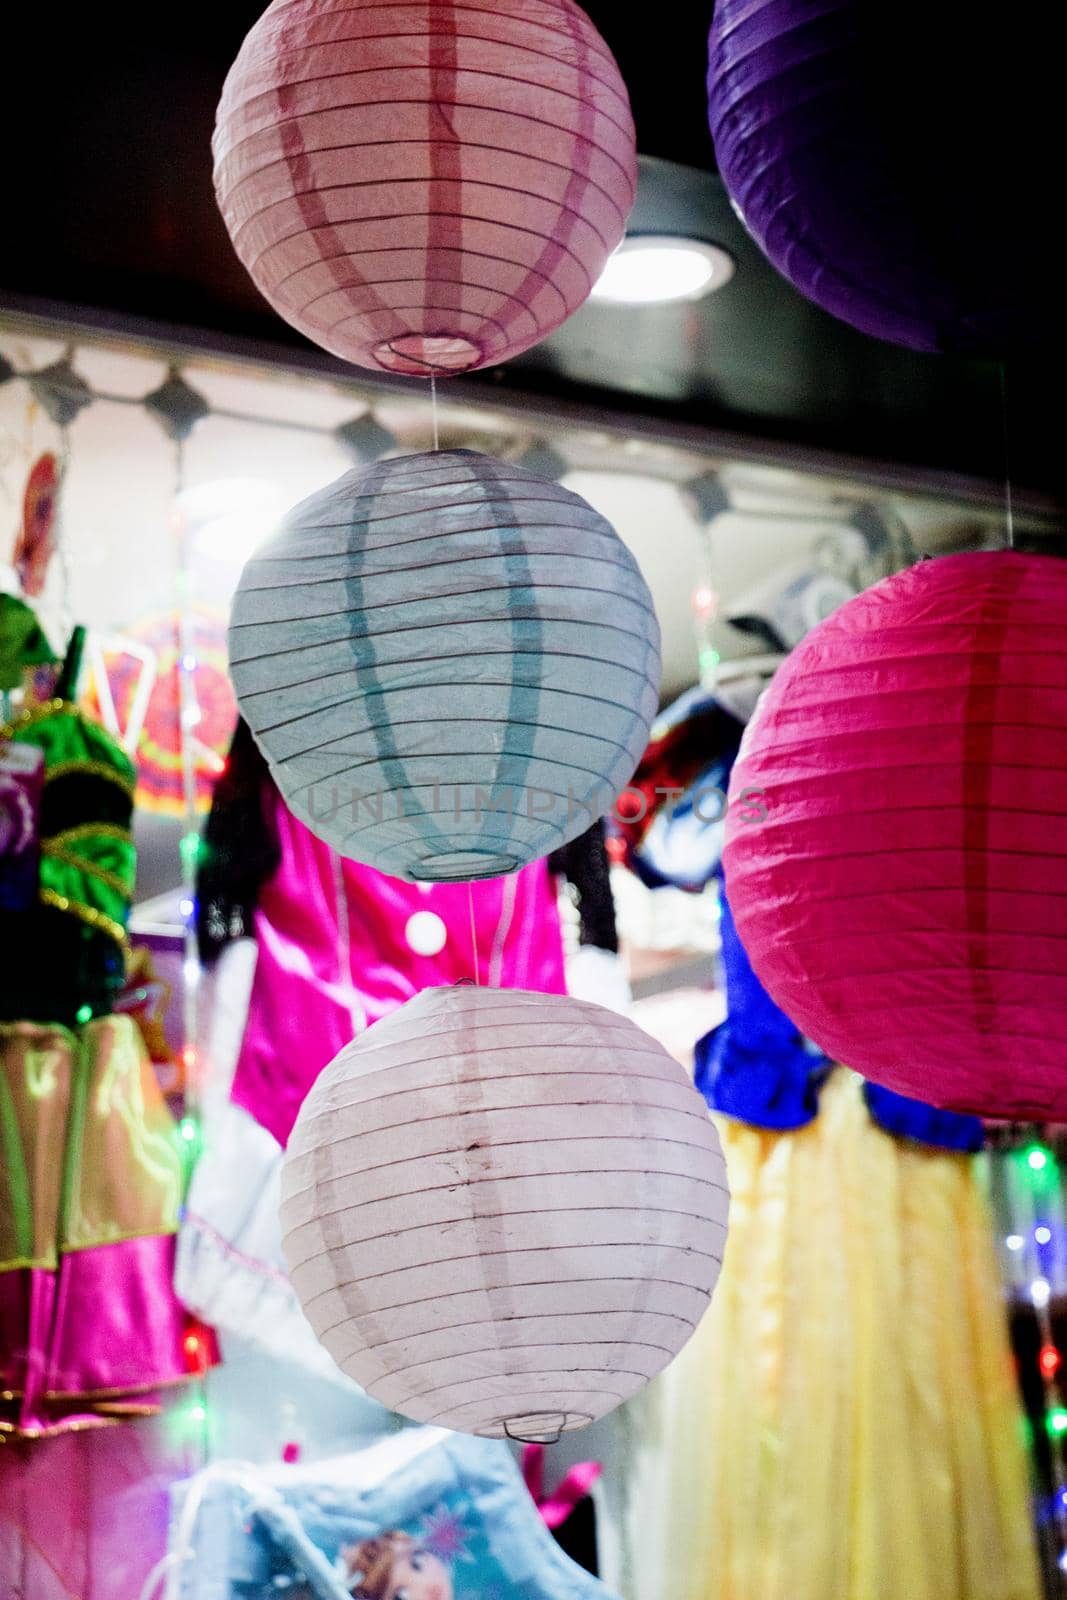 Colorful paper lantern outdoor in the marketplace